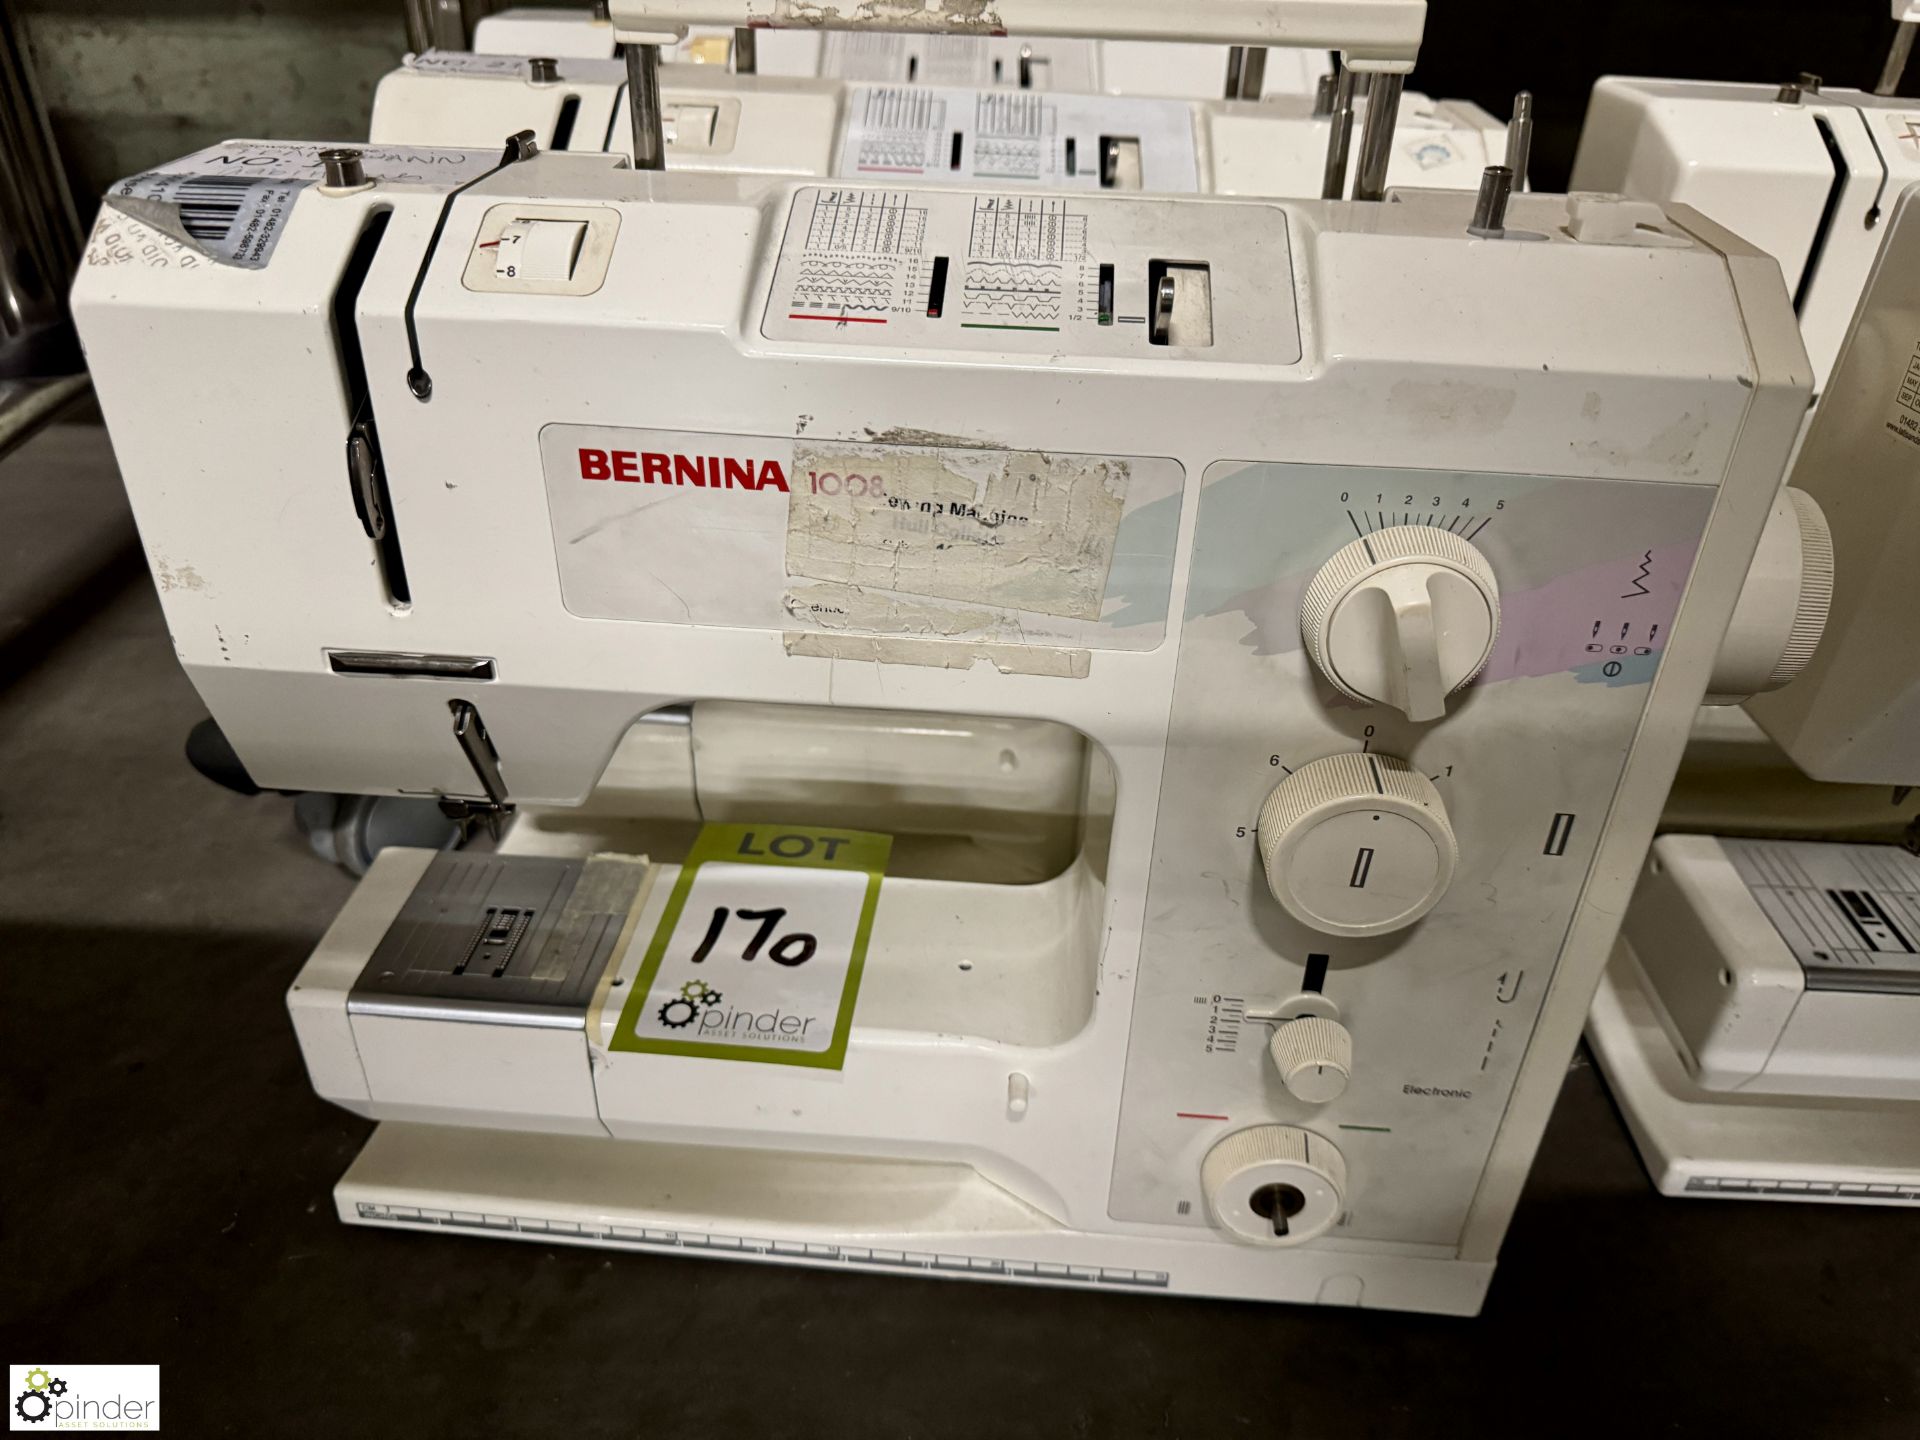 4 Bermina 1008 Domestic Lockstitch Sewing Machines, 240volts (no power leads or foot controls) - Image 2 of 4